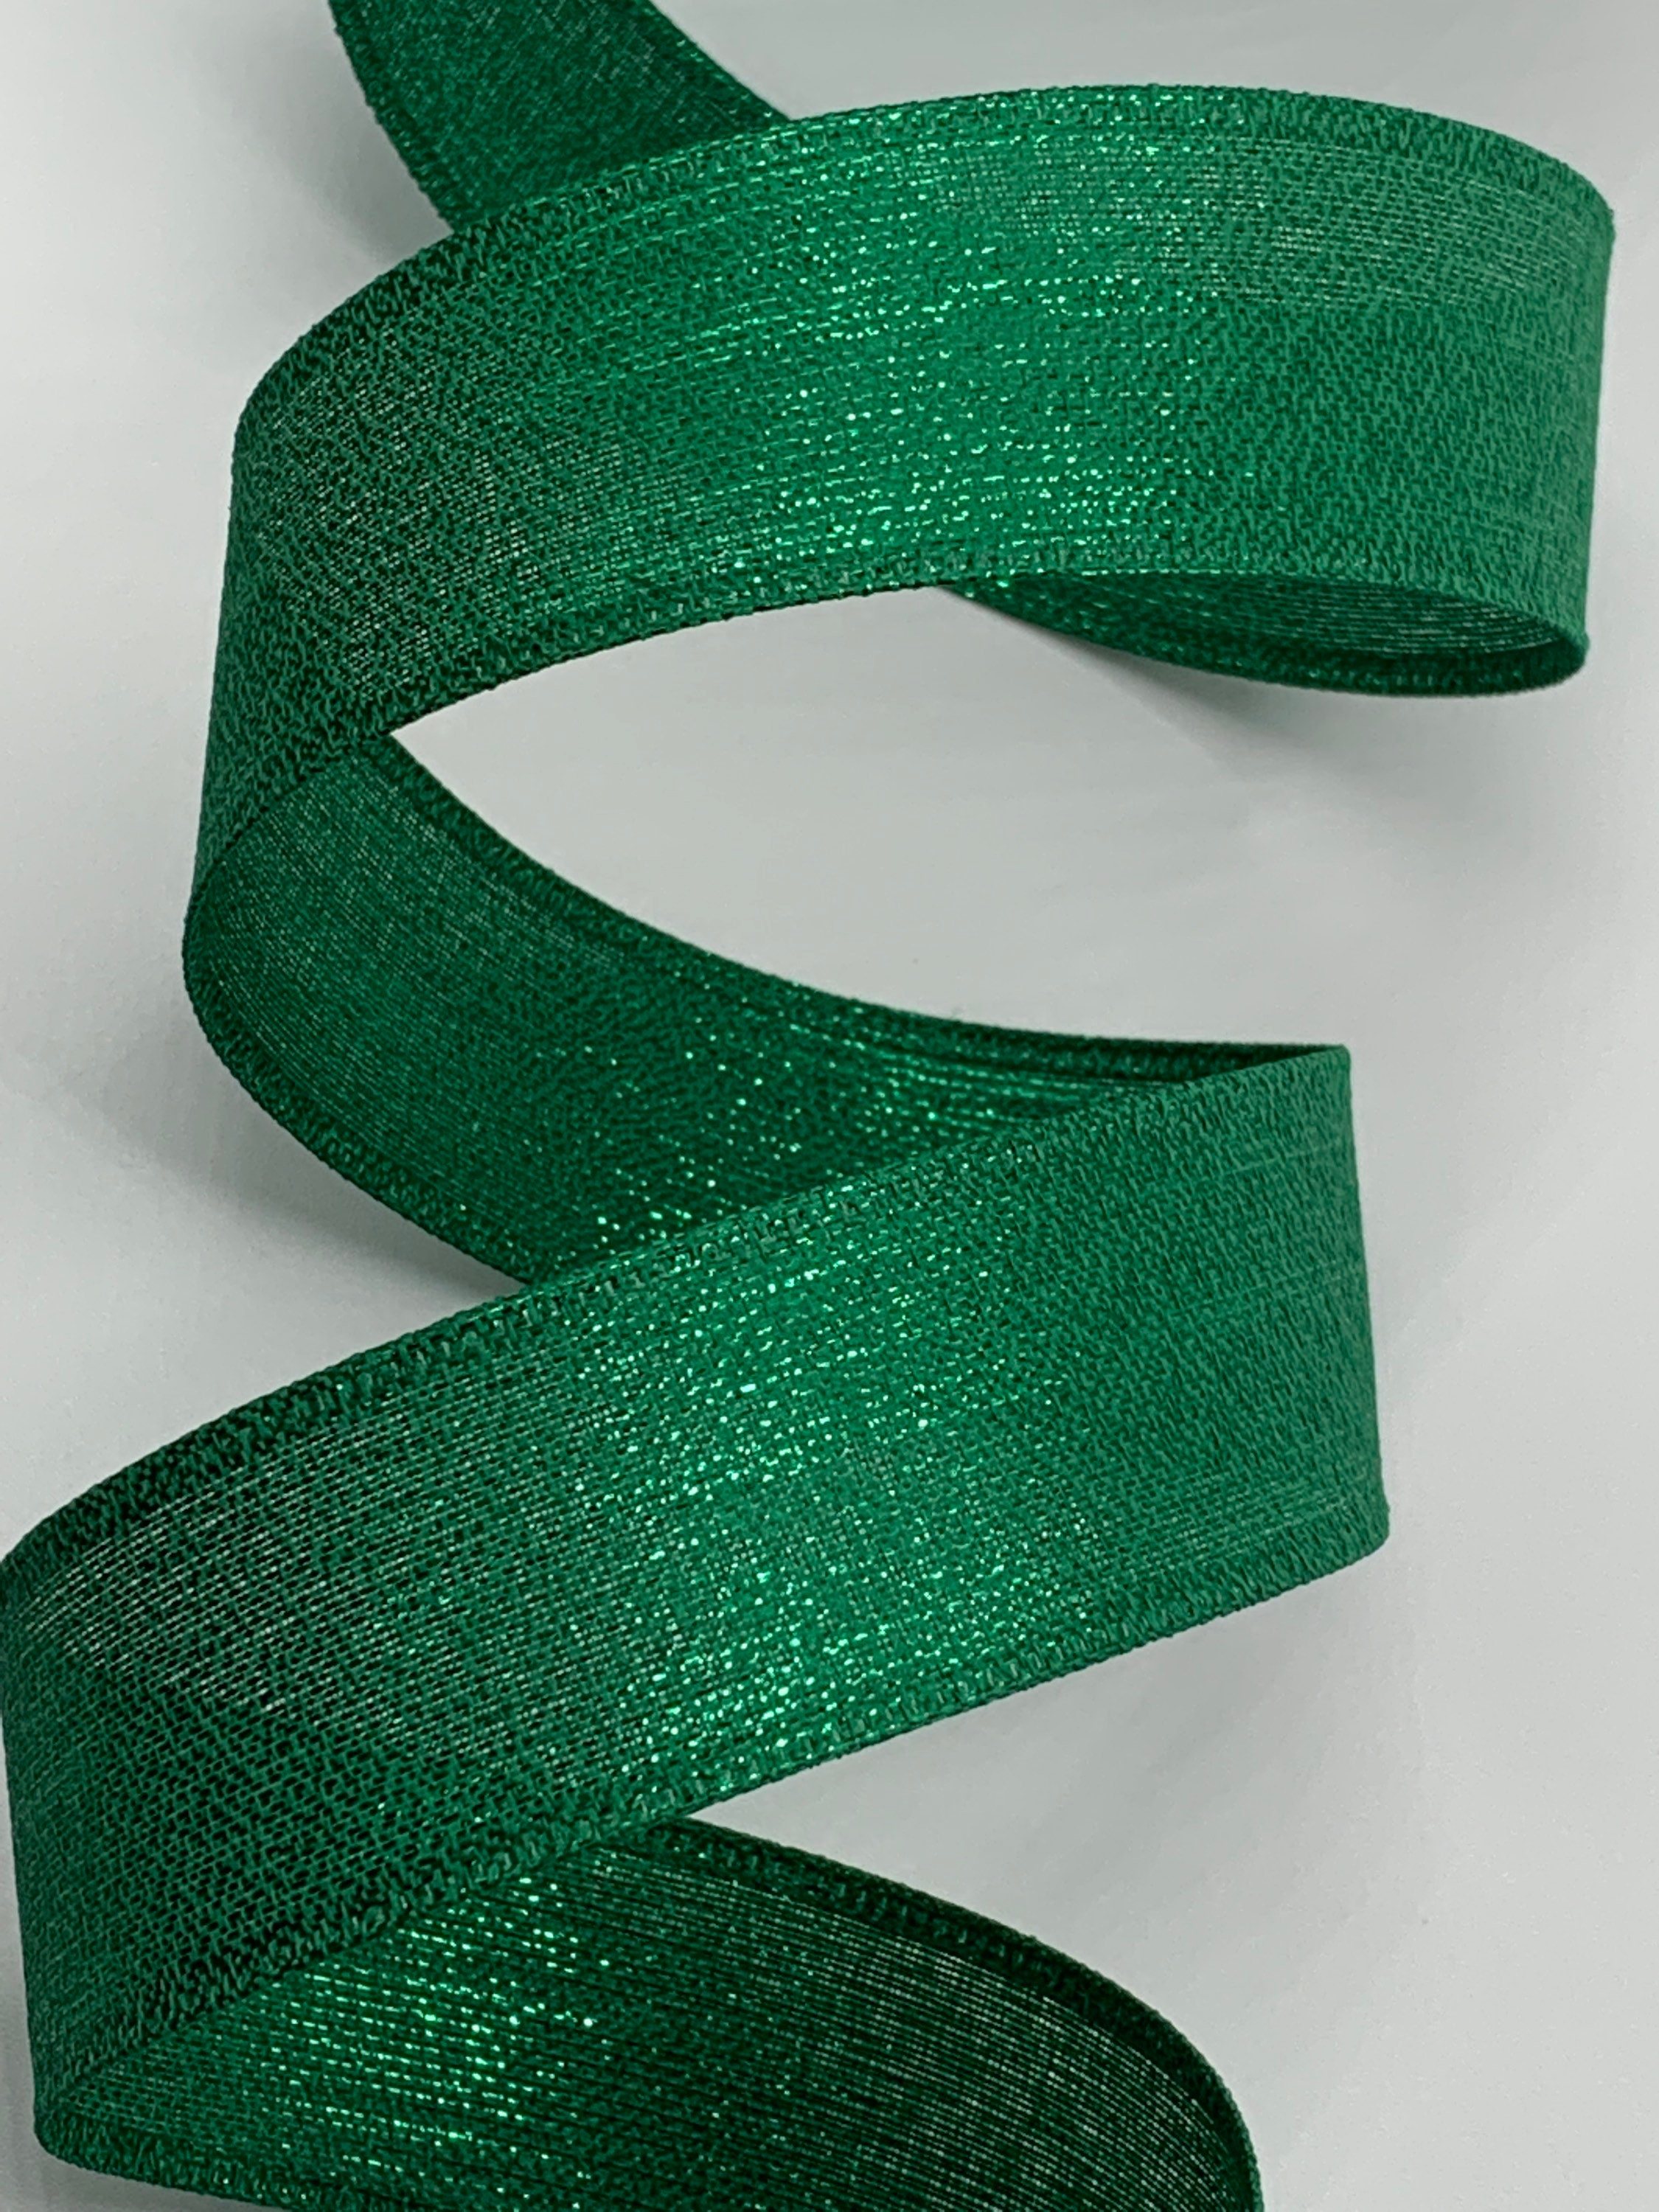 Emerald Green Ribbon, 1 1/2 Wide, Wired Edge, 5 YARDS